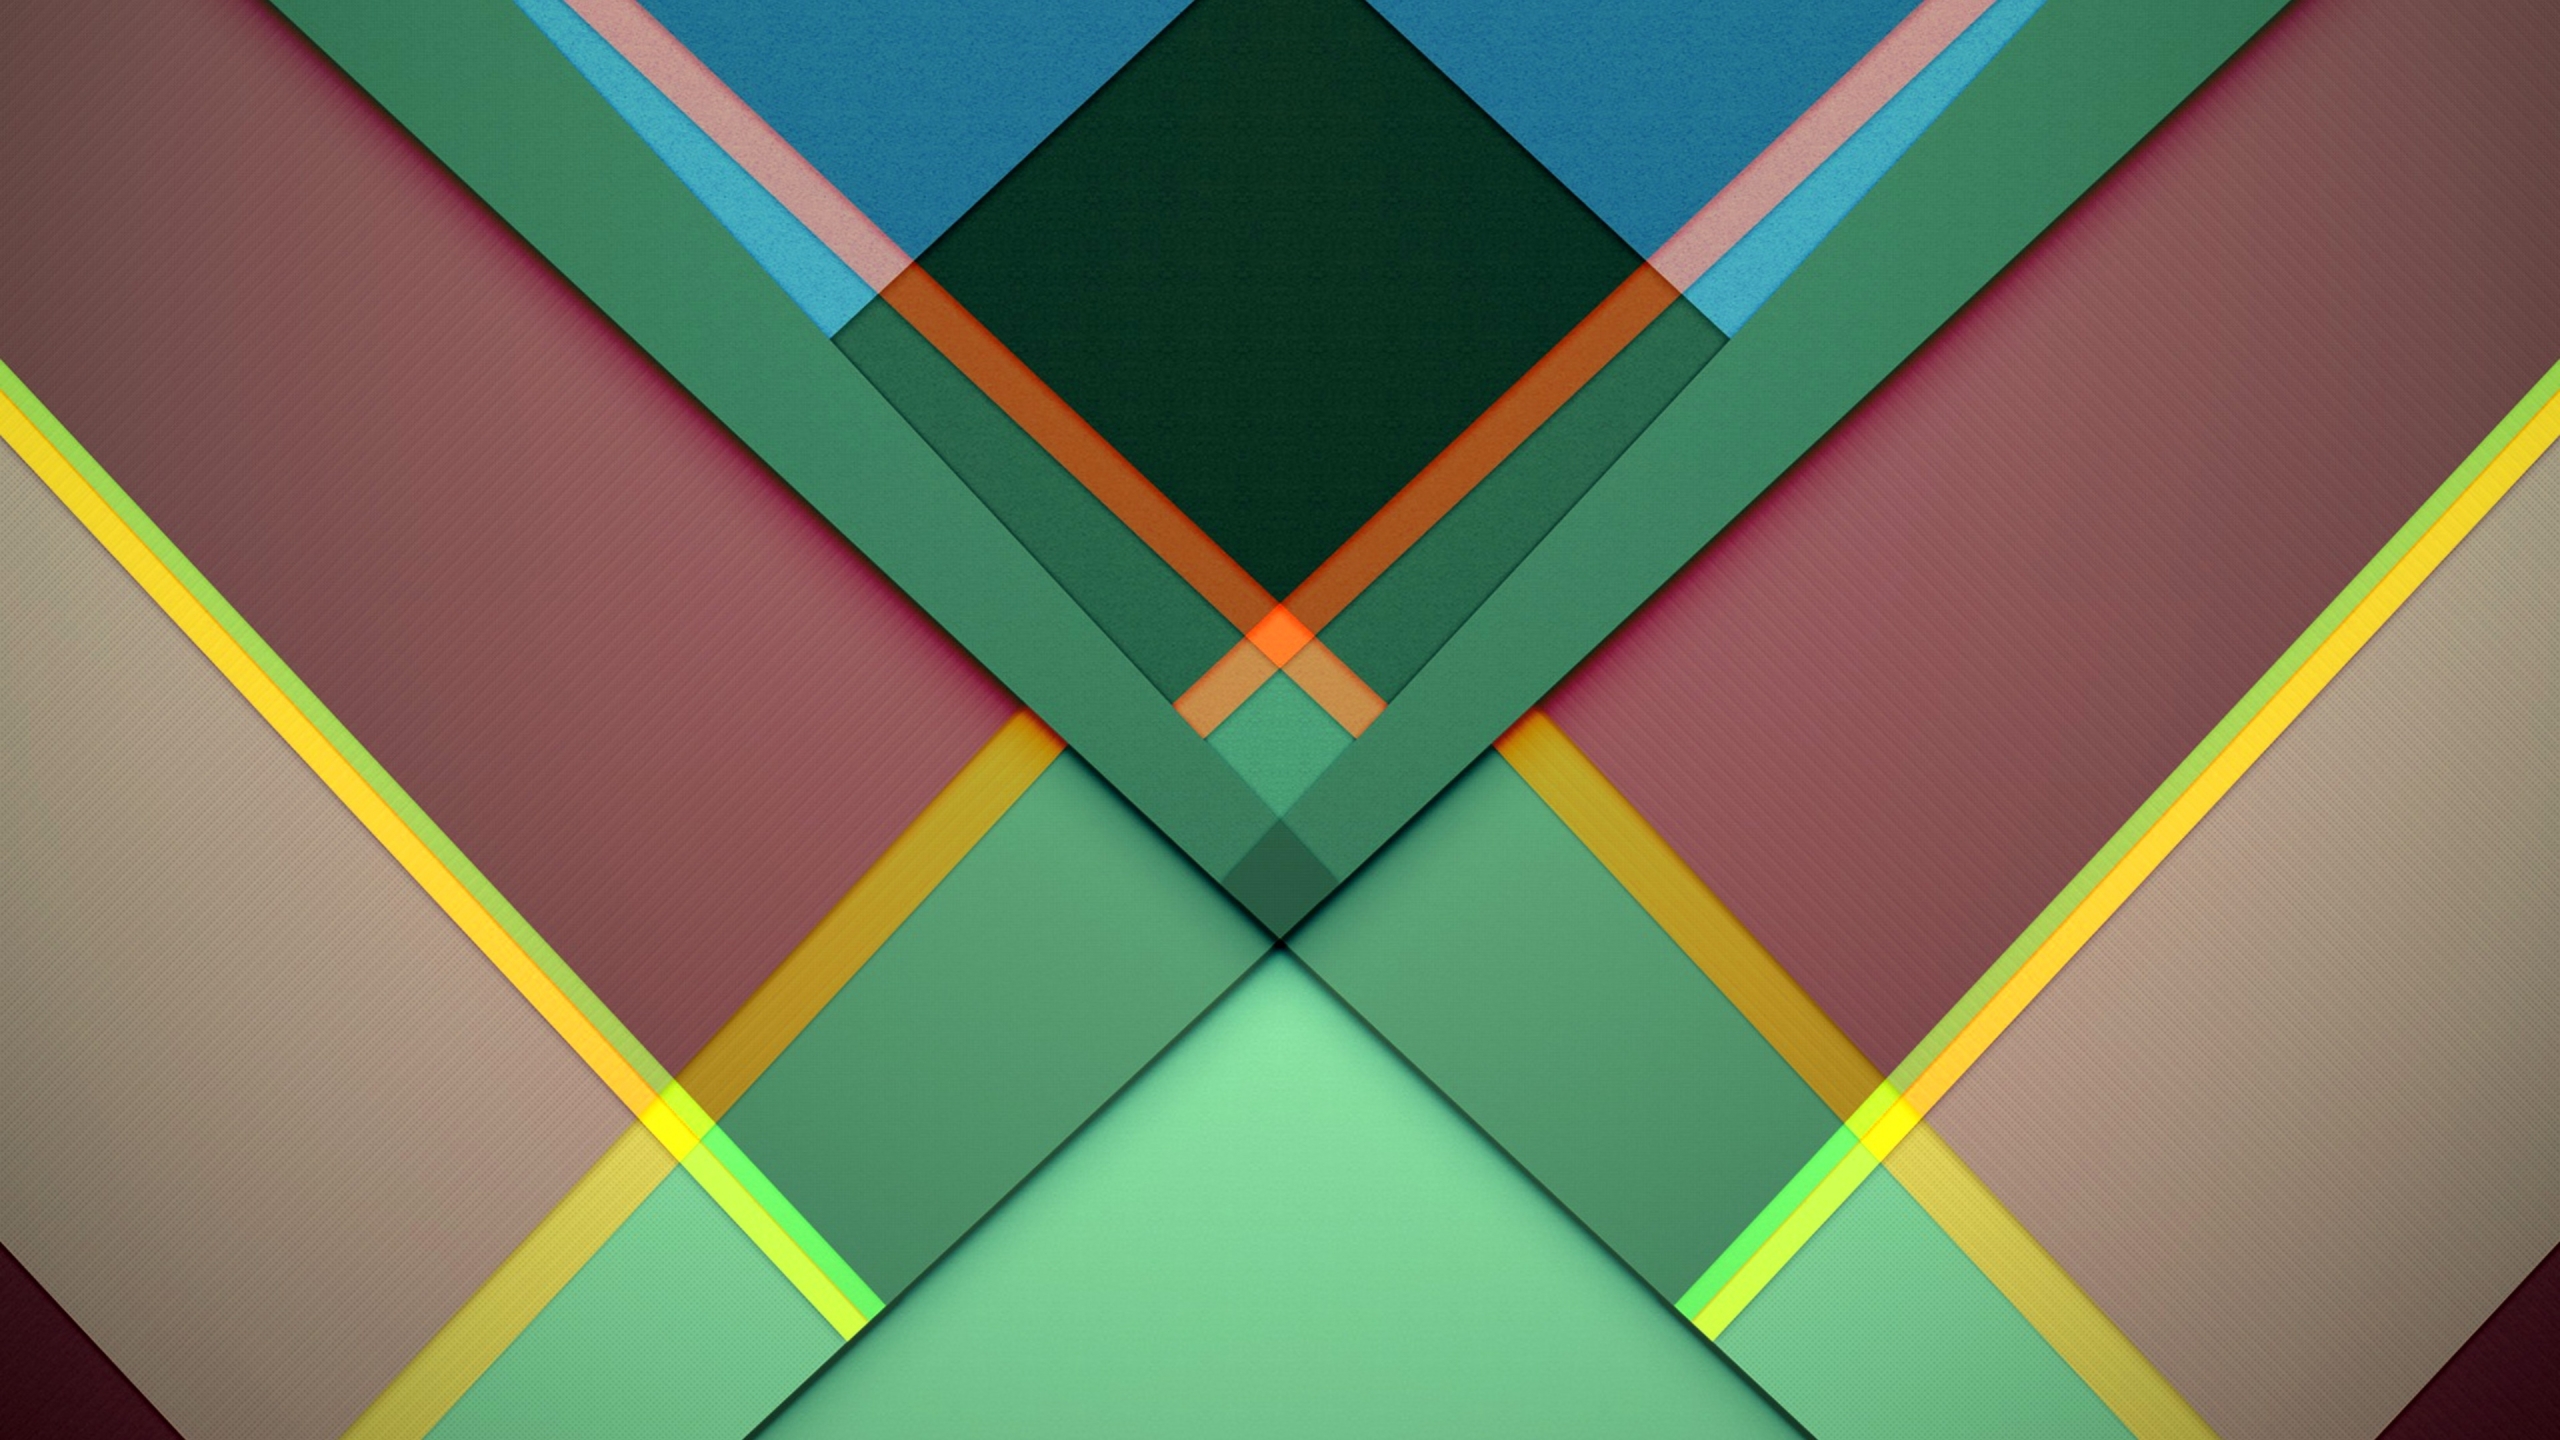 Geometric Shapes Wallpaper 4k Lines - IMAGESEE